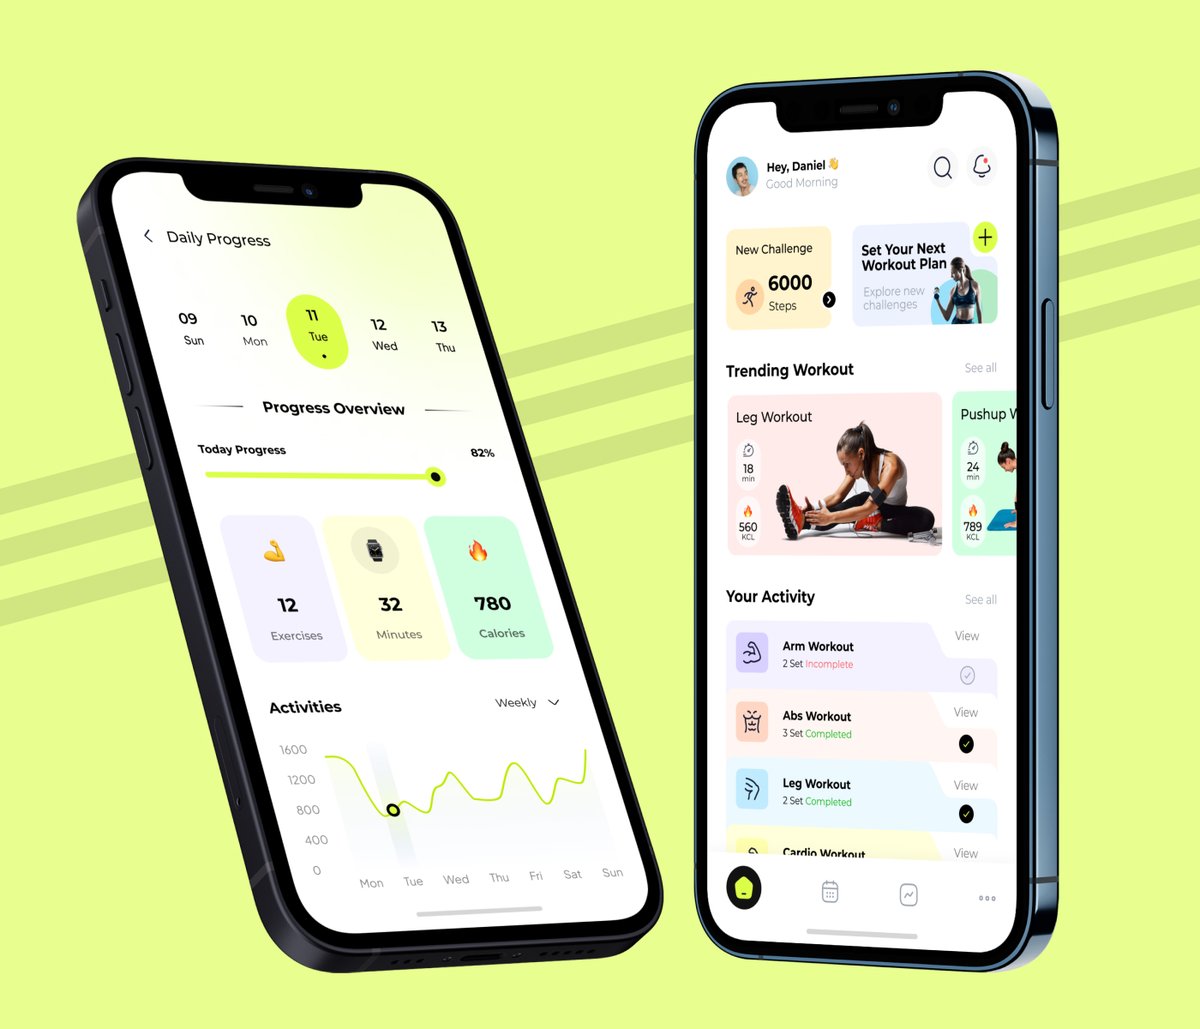 Hello Awesome peoples🔥

I would love to share with you guys my recent work Fitness & Workout App UXUI Design.  

#FitDesign #WorkoutUX #FitnessAppDesign #bodyApp #HealthyHabits #ExerciseExperience #MotionDesign #WellnessUI #FitTech #BodyMindBalance #uxuidesign #uxapp #exercise